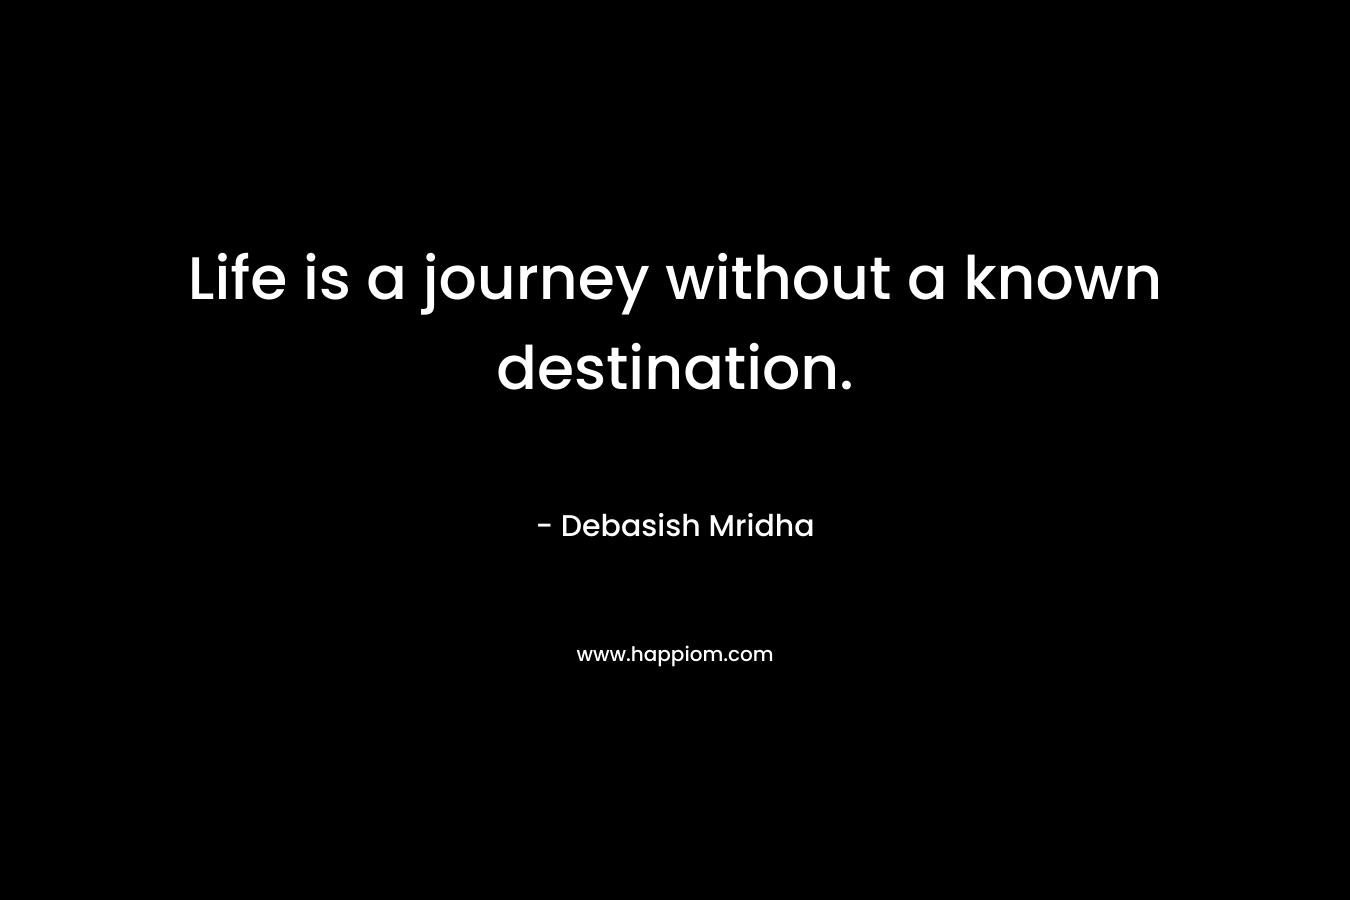 Life is a journey without a known destination.